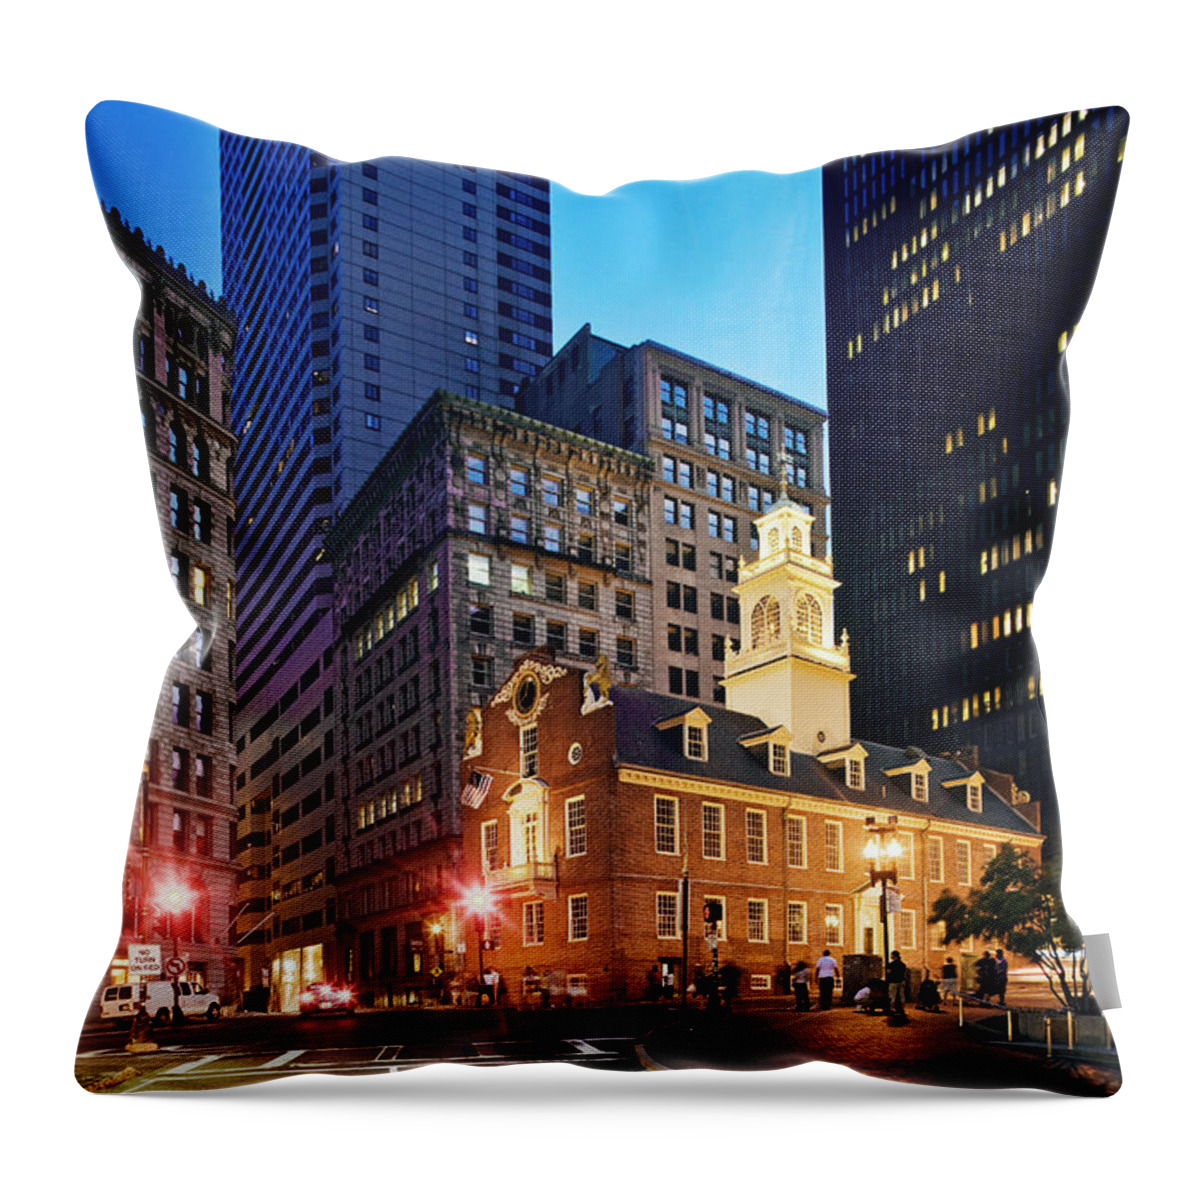 Estock Throw Pillow featuring the digital art Old State House, Boston #1 by Massimo Borchi